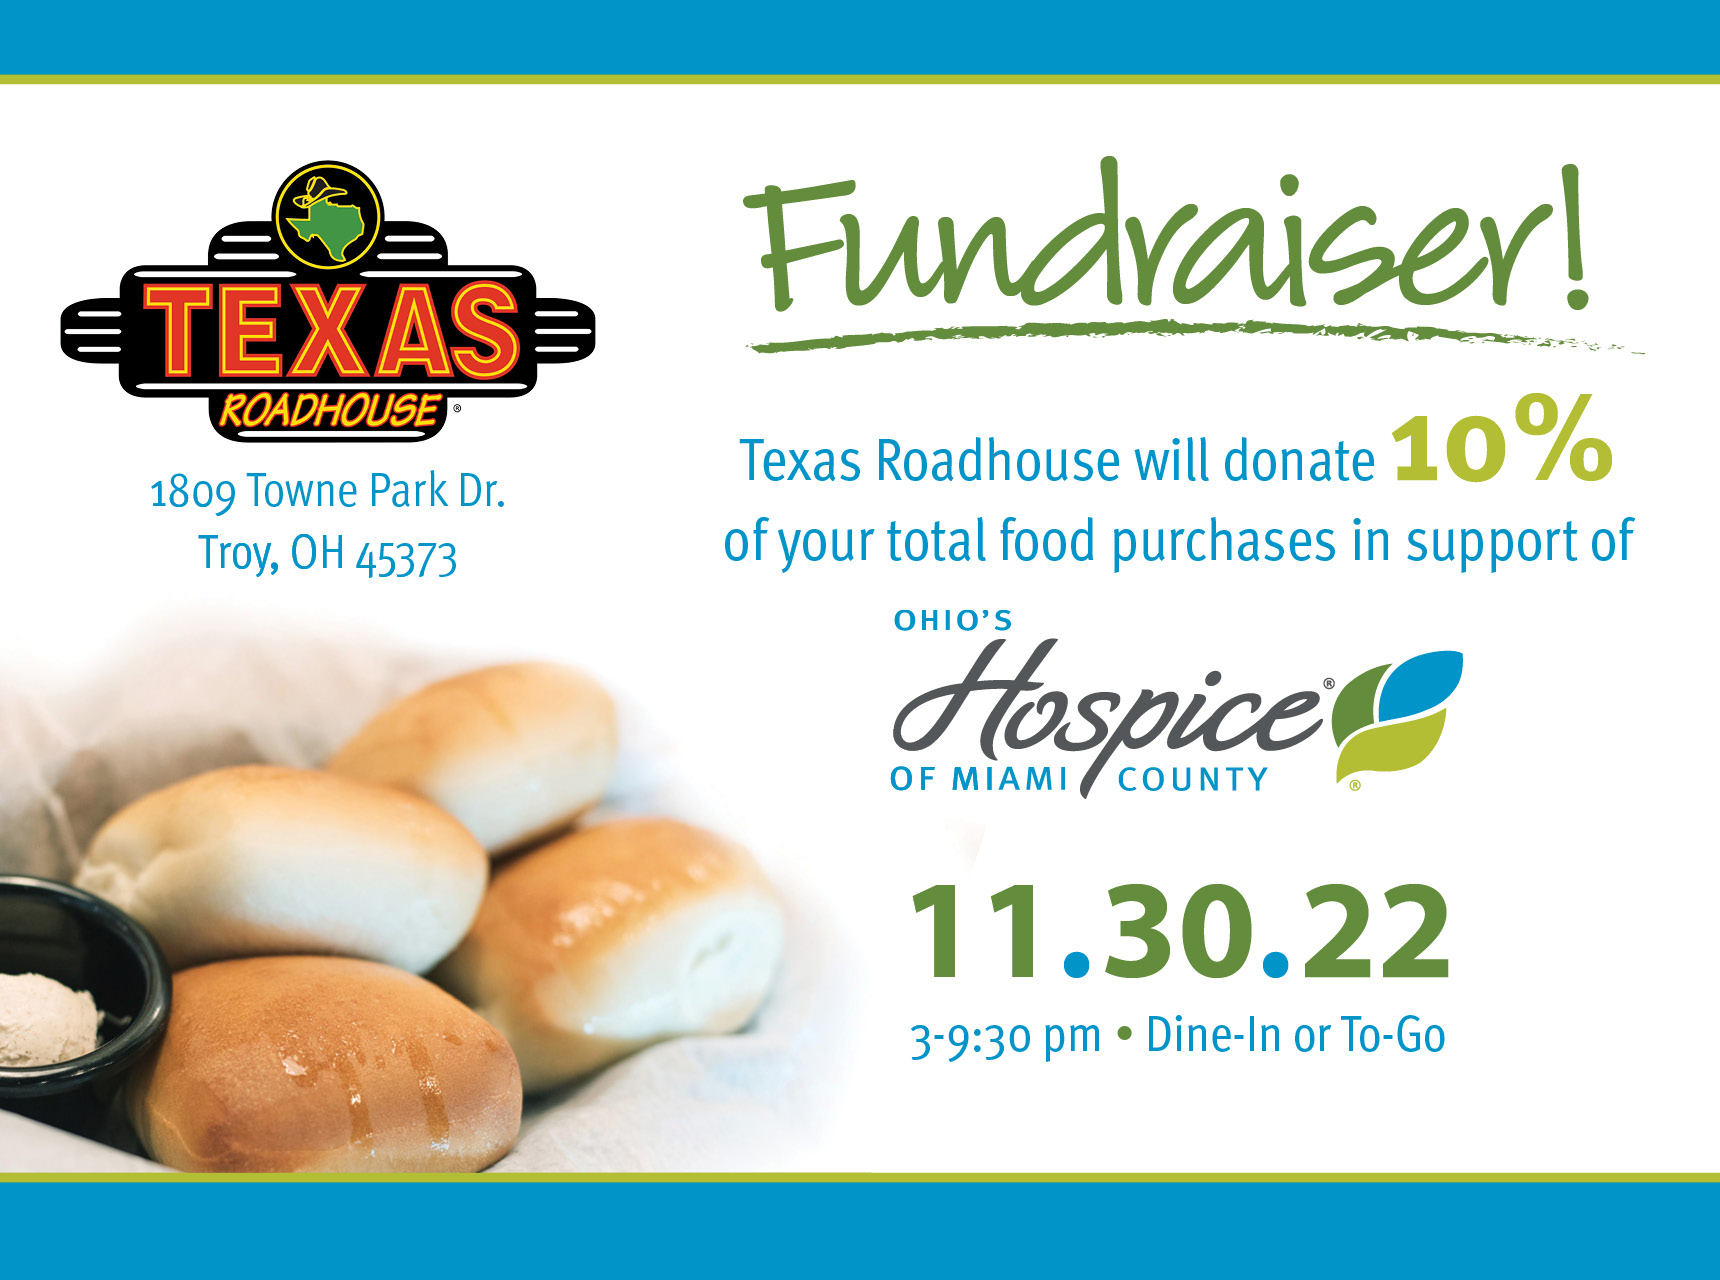 Texas Roadhouse Fundraiser: Texas Roadhouse will dontate 10% of your food purchases to Ohio's Hospice of Miami County.